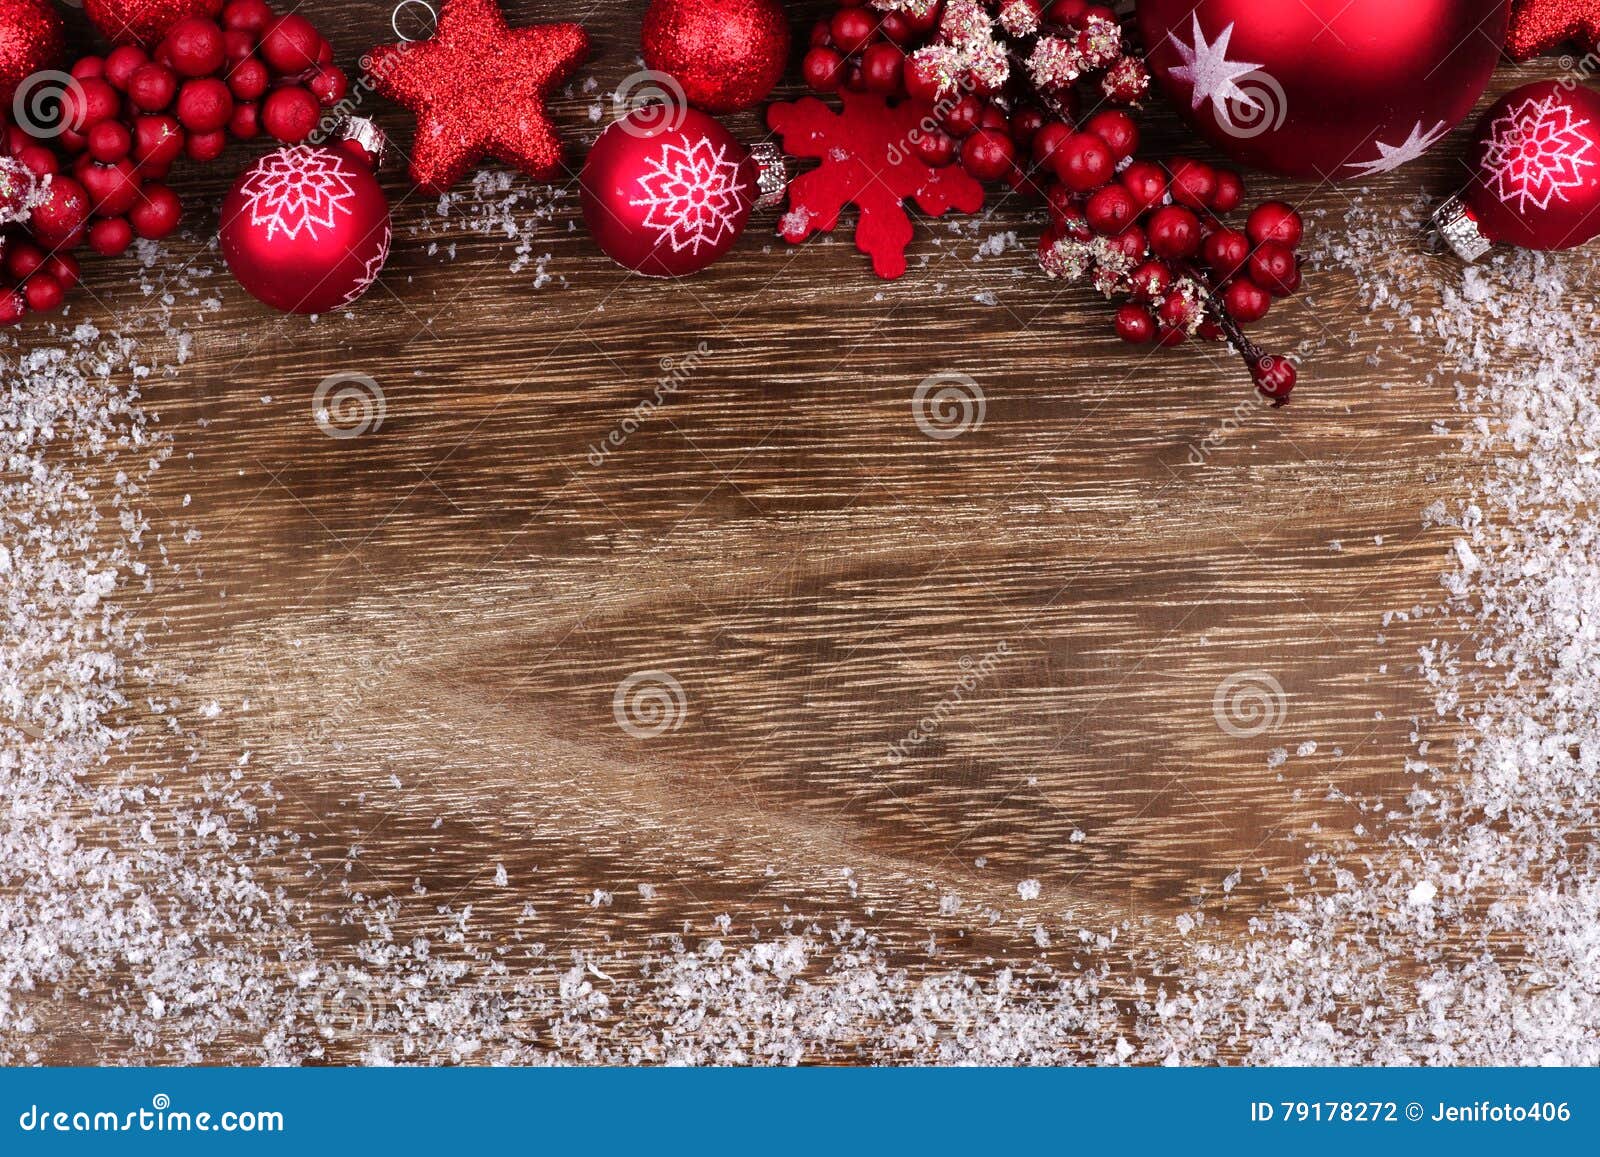 Red Christmas Ornament Top Border with Snow Frame on Wood Stock Photo ...